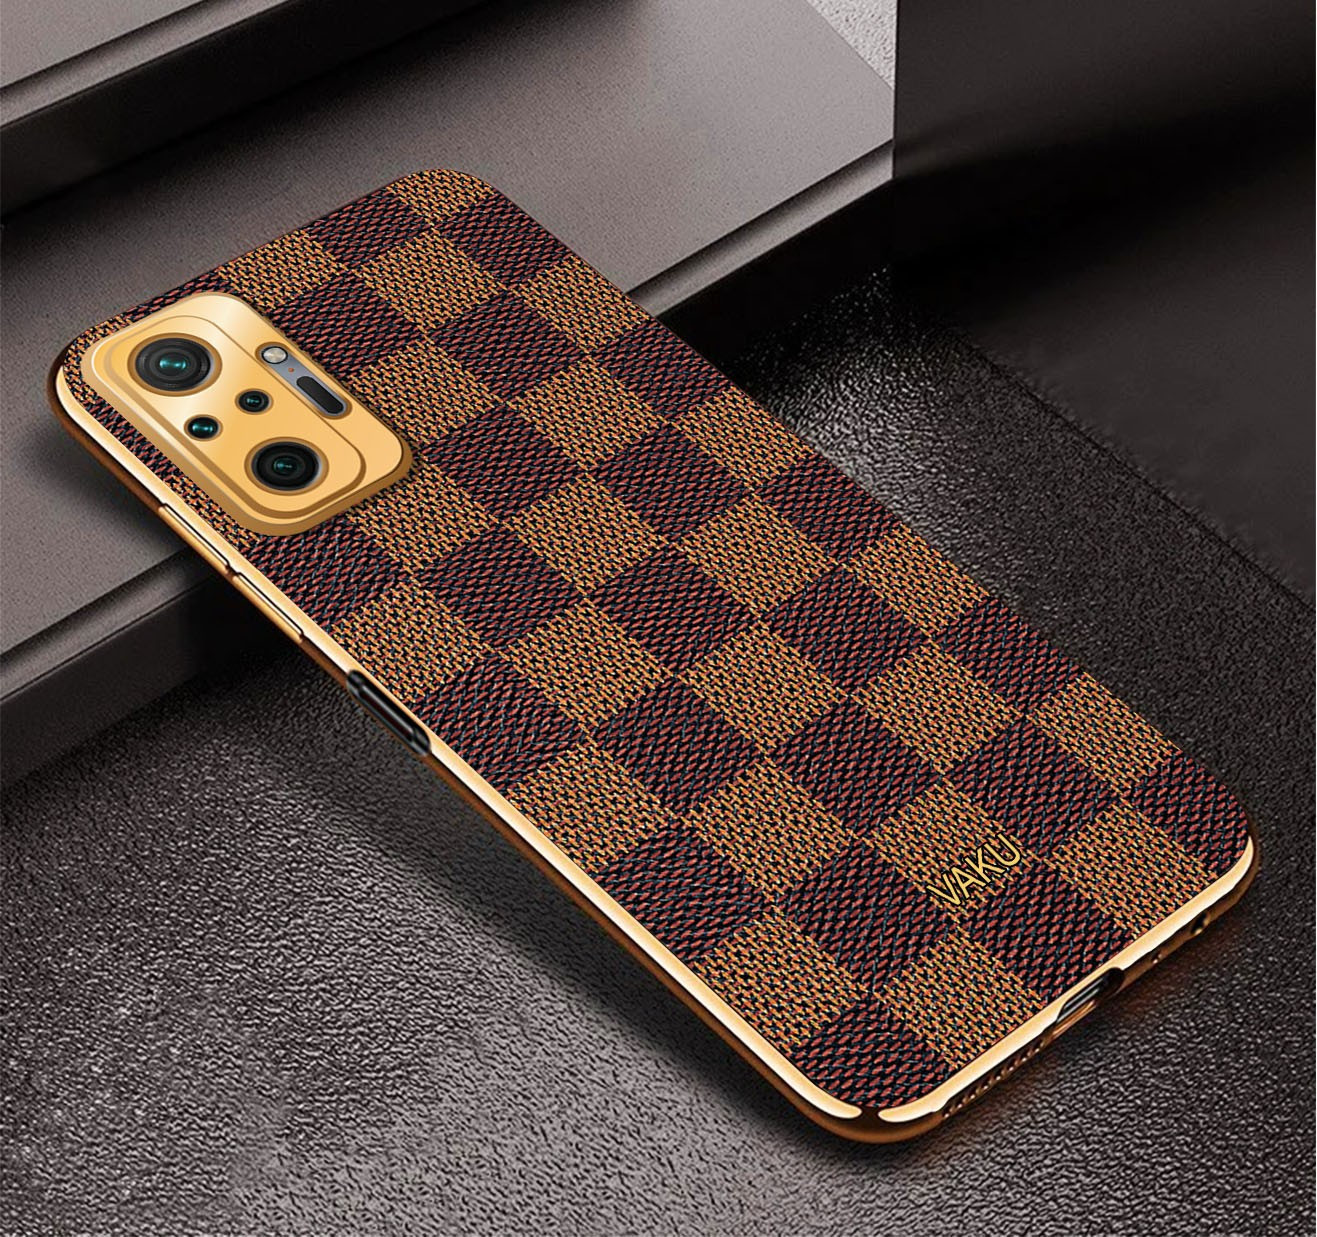 Vaku ® Redmi Note 10 Pro Max Cheron Series Leather Stitched Gold  Electroplated Soft TPU Back Cover - Redmi Note 10 Pro Max - Xiaomi - Mobile  / Tablet - Screen Guards India